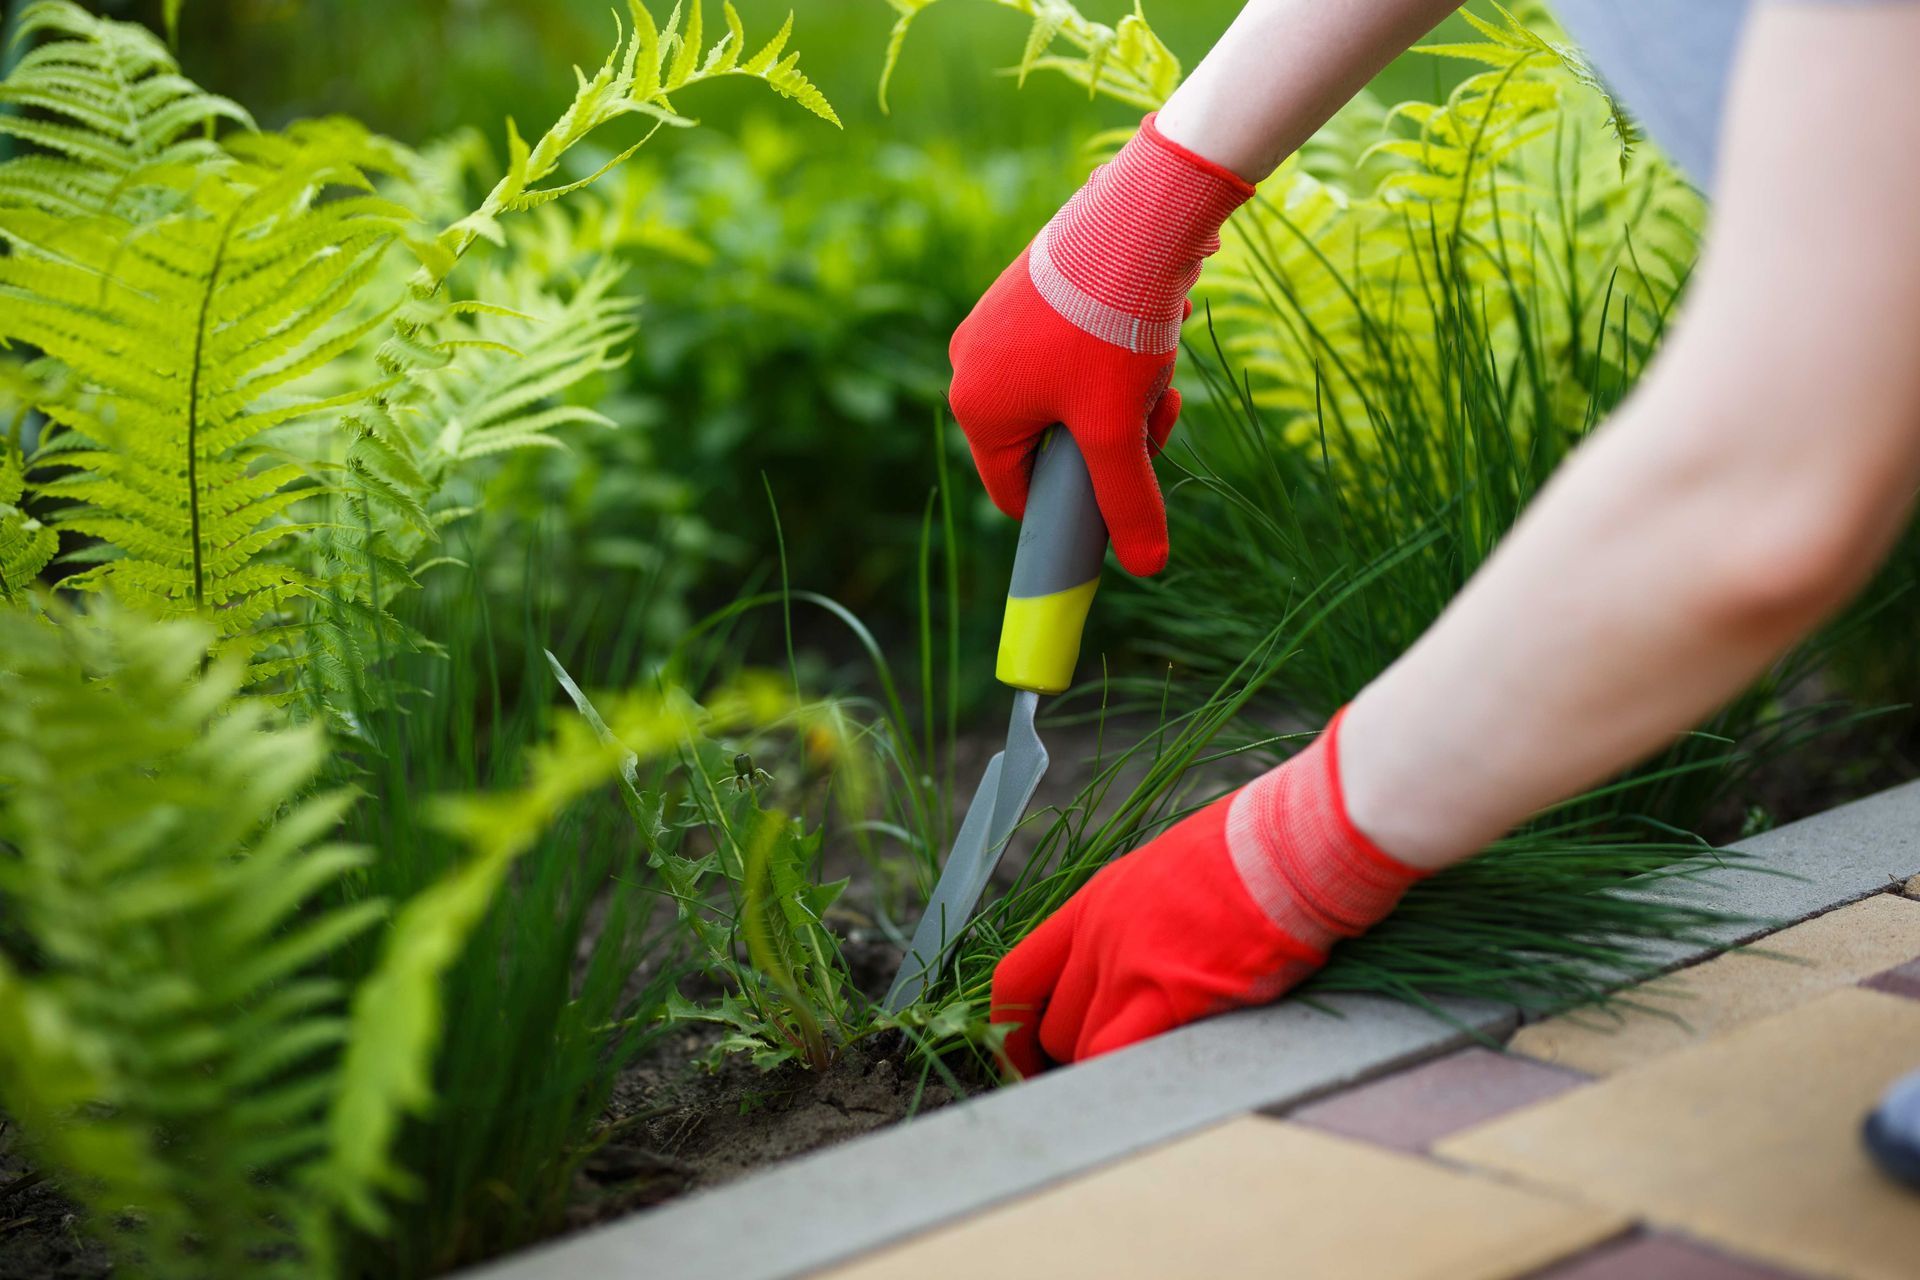 a person wearing red gloves is working in a garden taking weeds